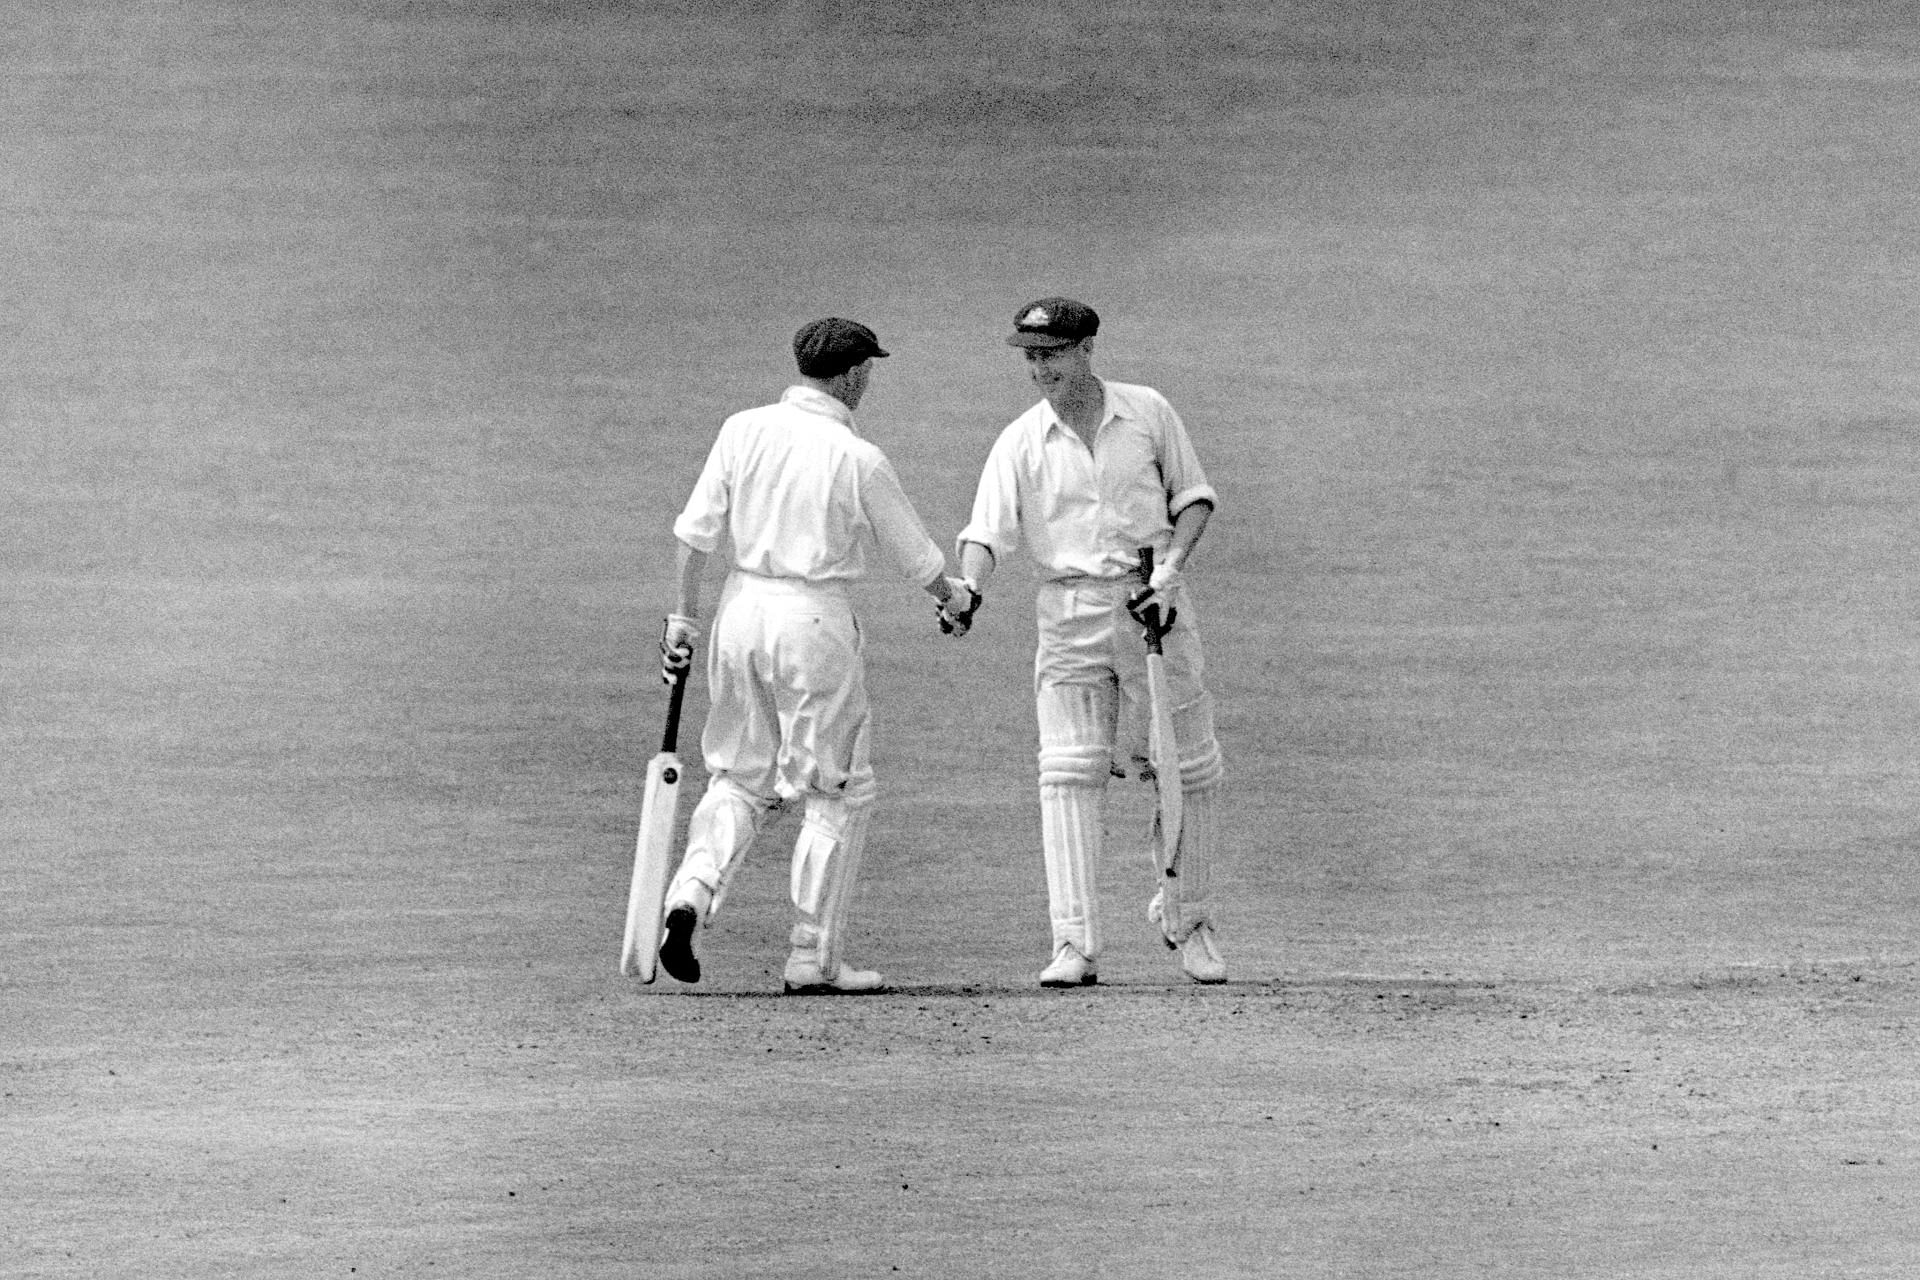 Don Bradman congratulating Arthur Morris on reaching his century during their record 400-runs plus victory chase at Headingley in 1948